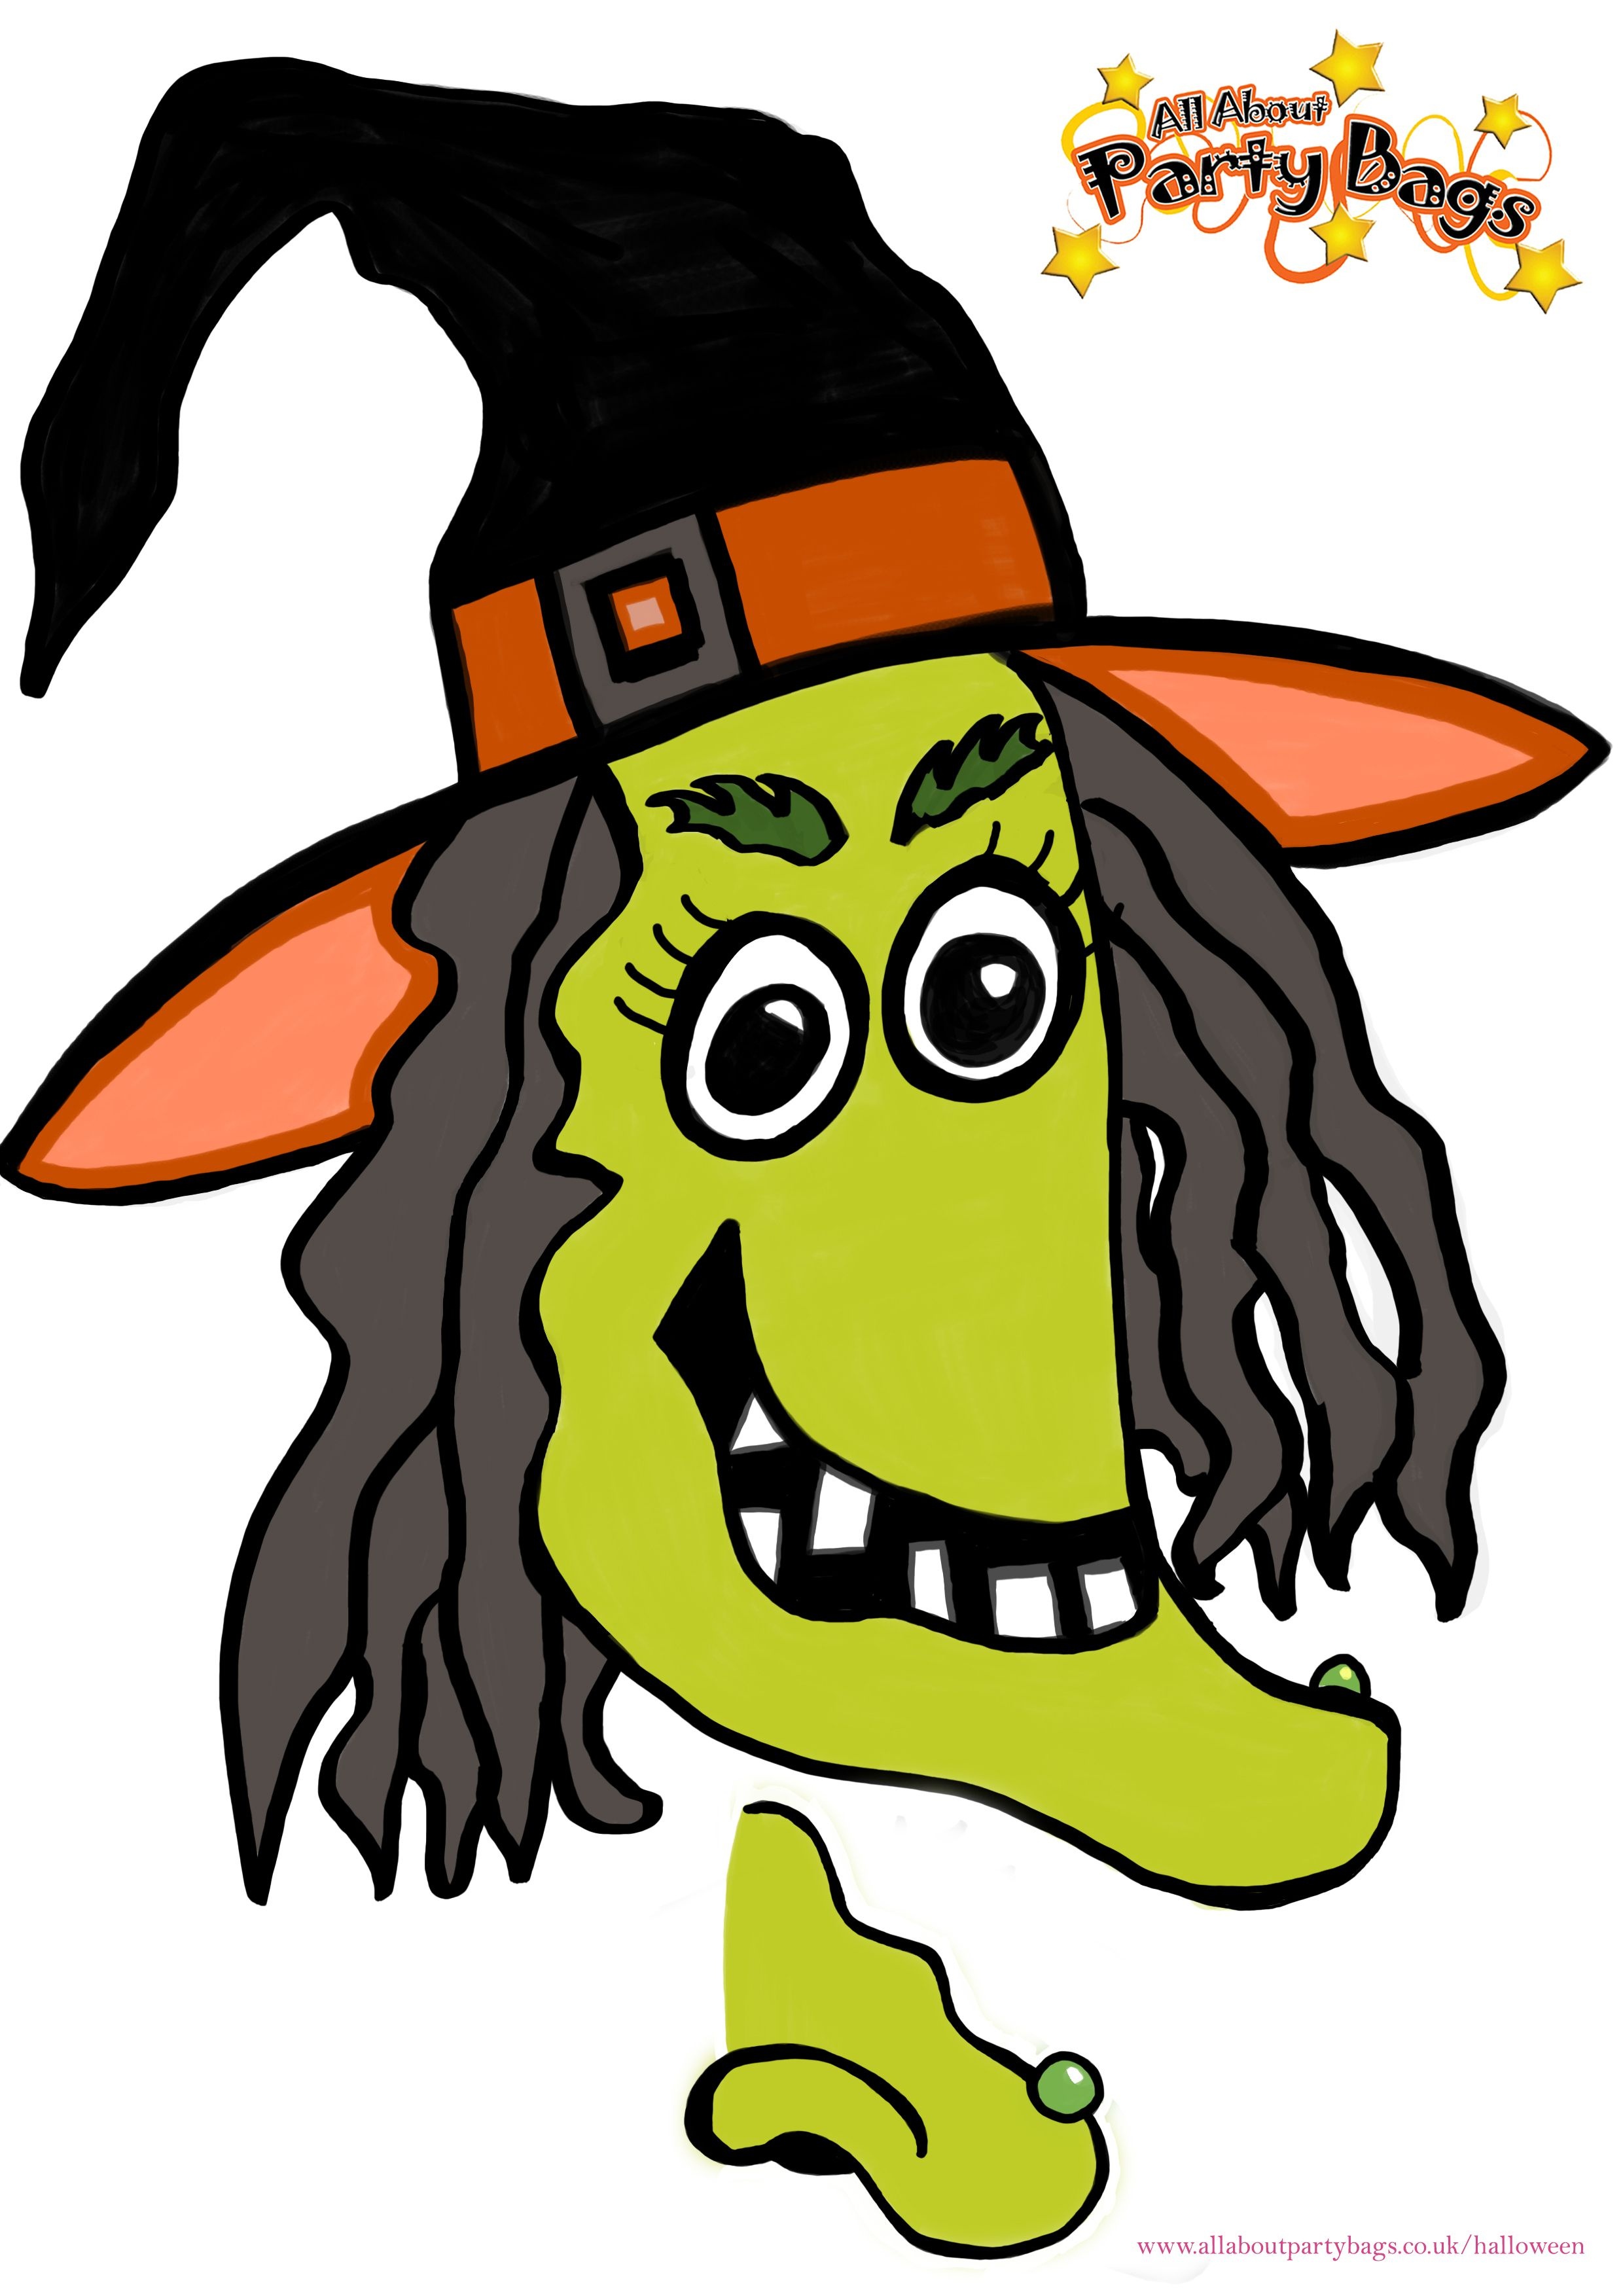 Supercoloring Witch Coloring Pages For Kids